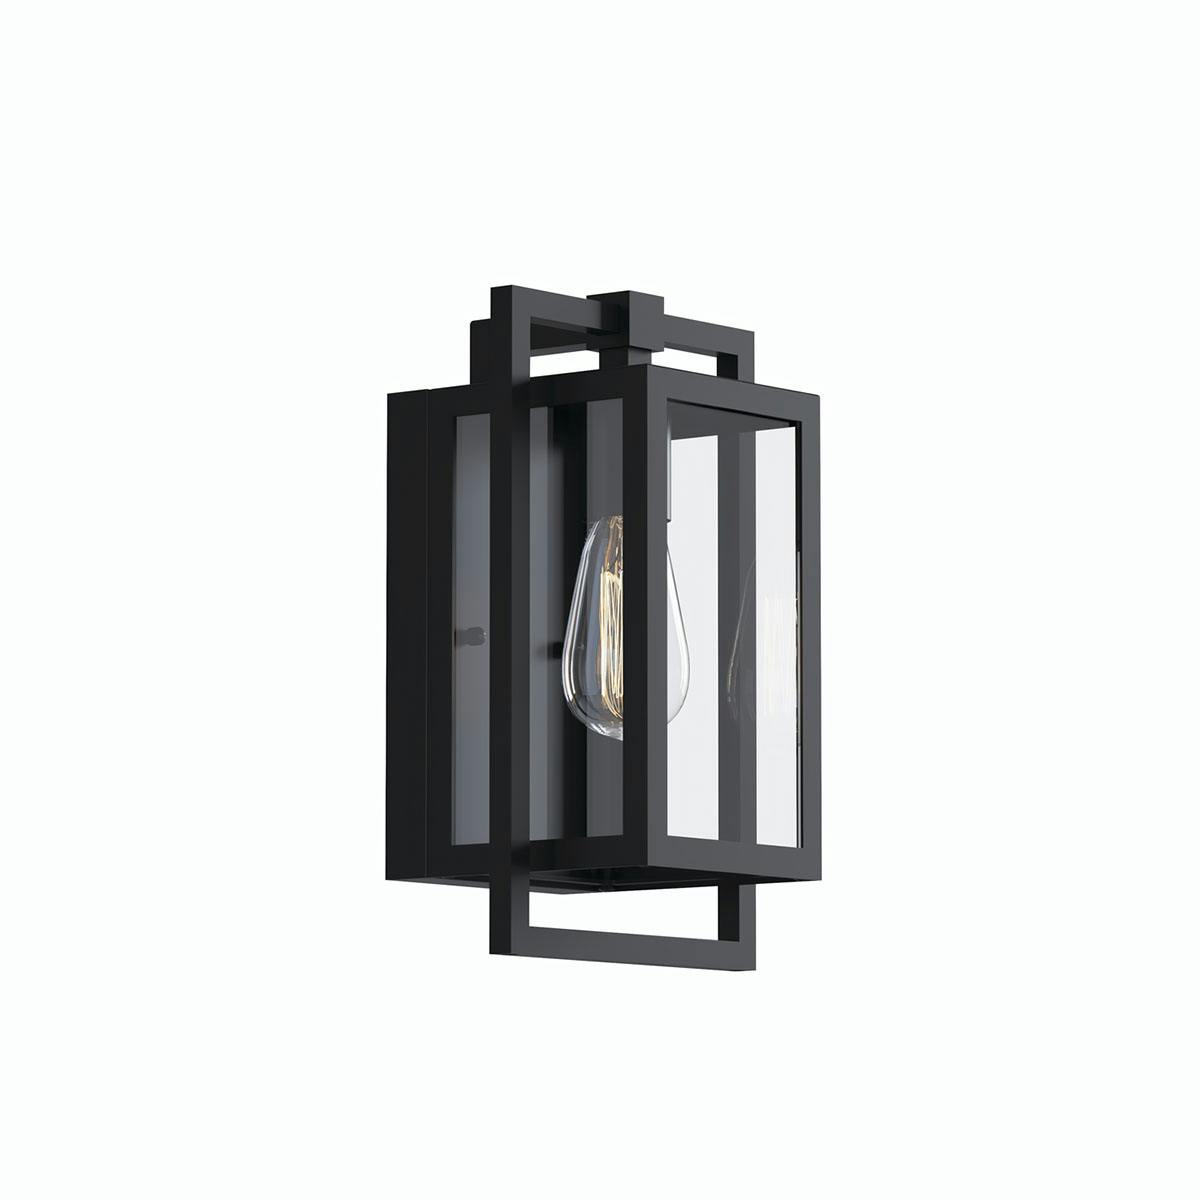 Goson 12" Wall Light in a Black finish on a white background